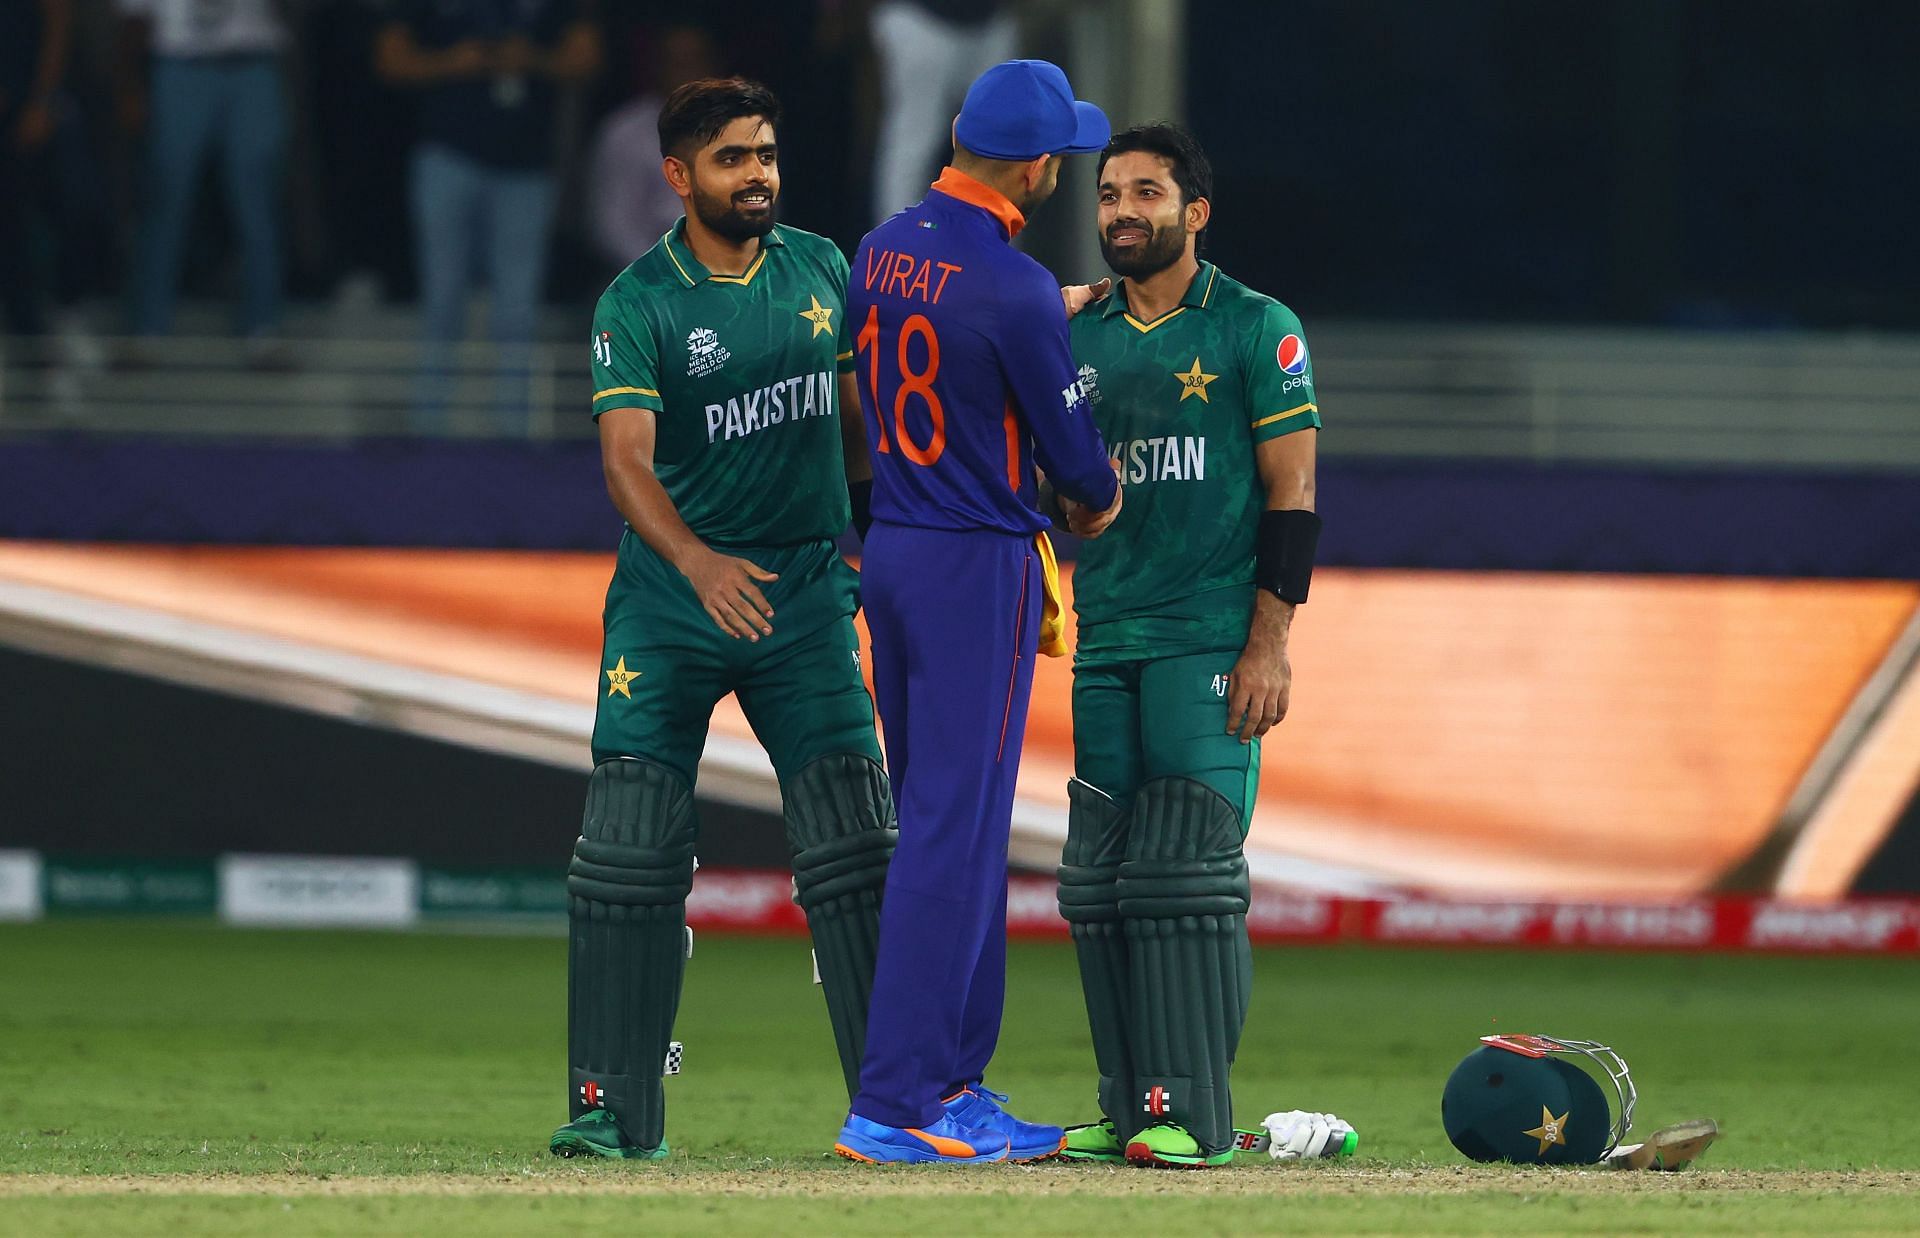 Kohli (C) greeting Babar (L) and Rizwan (R) after their encounter at the 2021 T20 World Cup